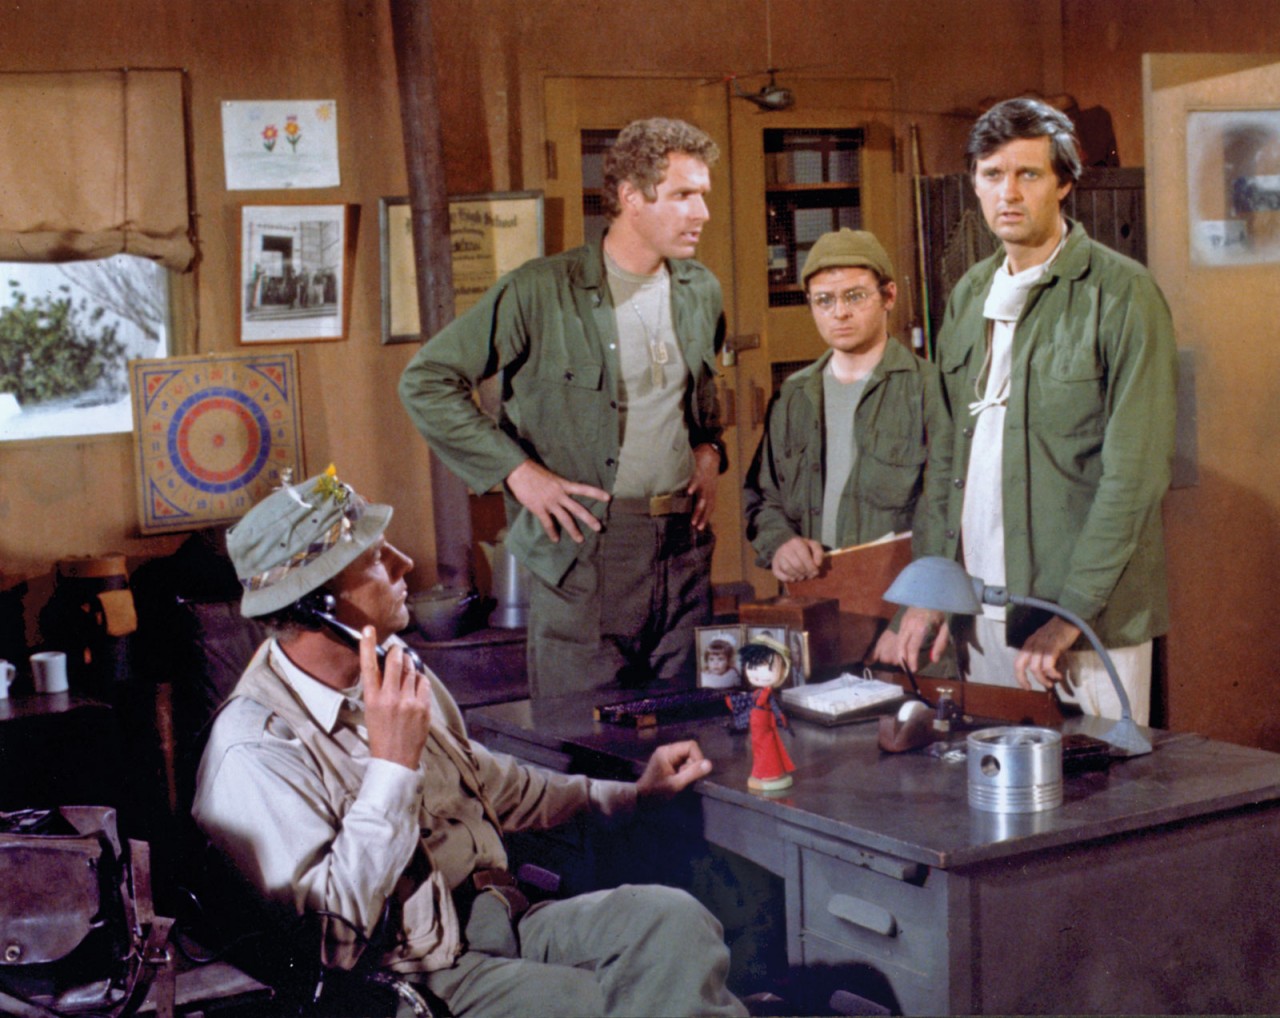 (From left) Actors McLean Stevenson, Wayne Rogers, Gary Burghoff, and Alan Alda in a scene from the television series M*A*S*H. © Columbia Broadcasting System